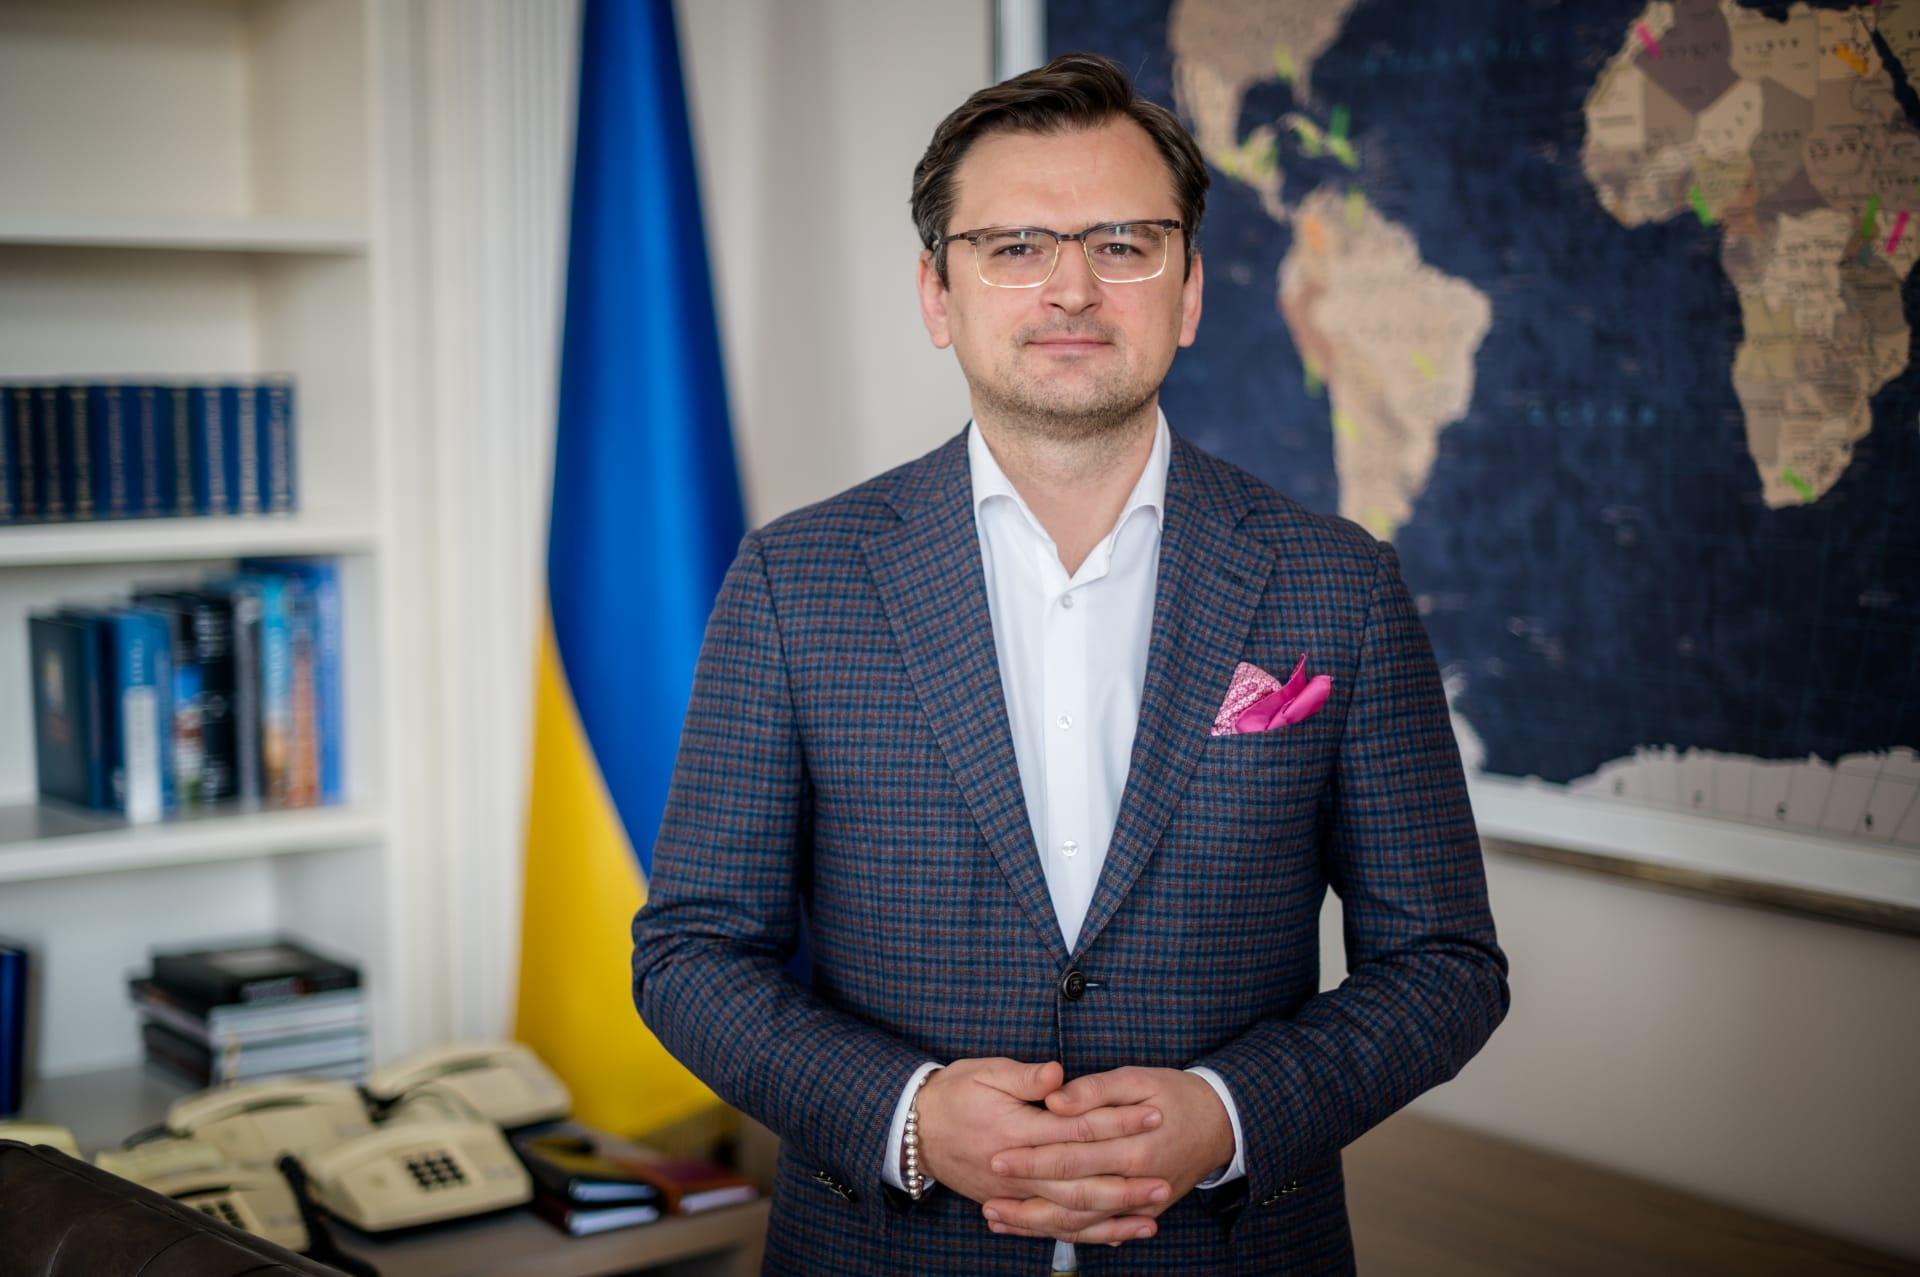 Ukraine's victory is based on three pillars: Kuleba told how the West can help defeat Russia